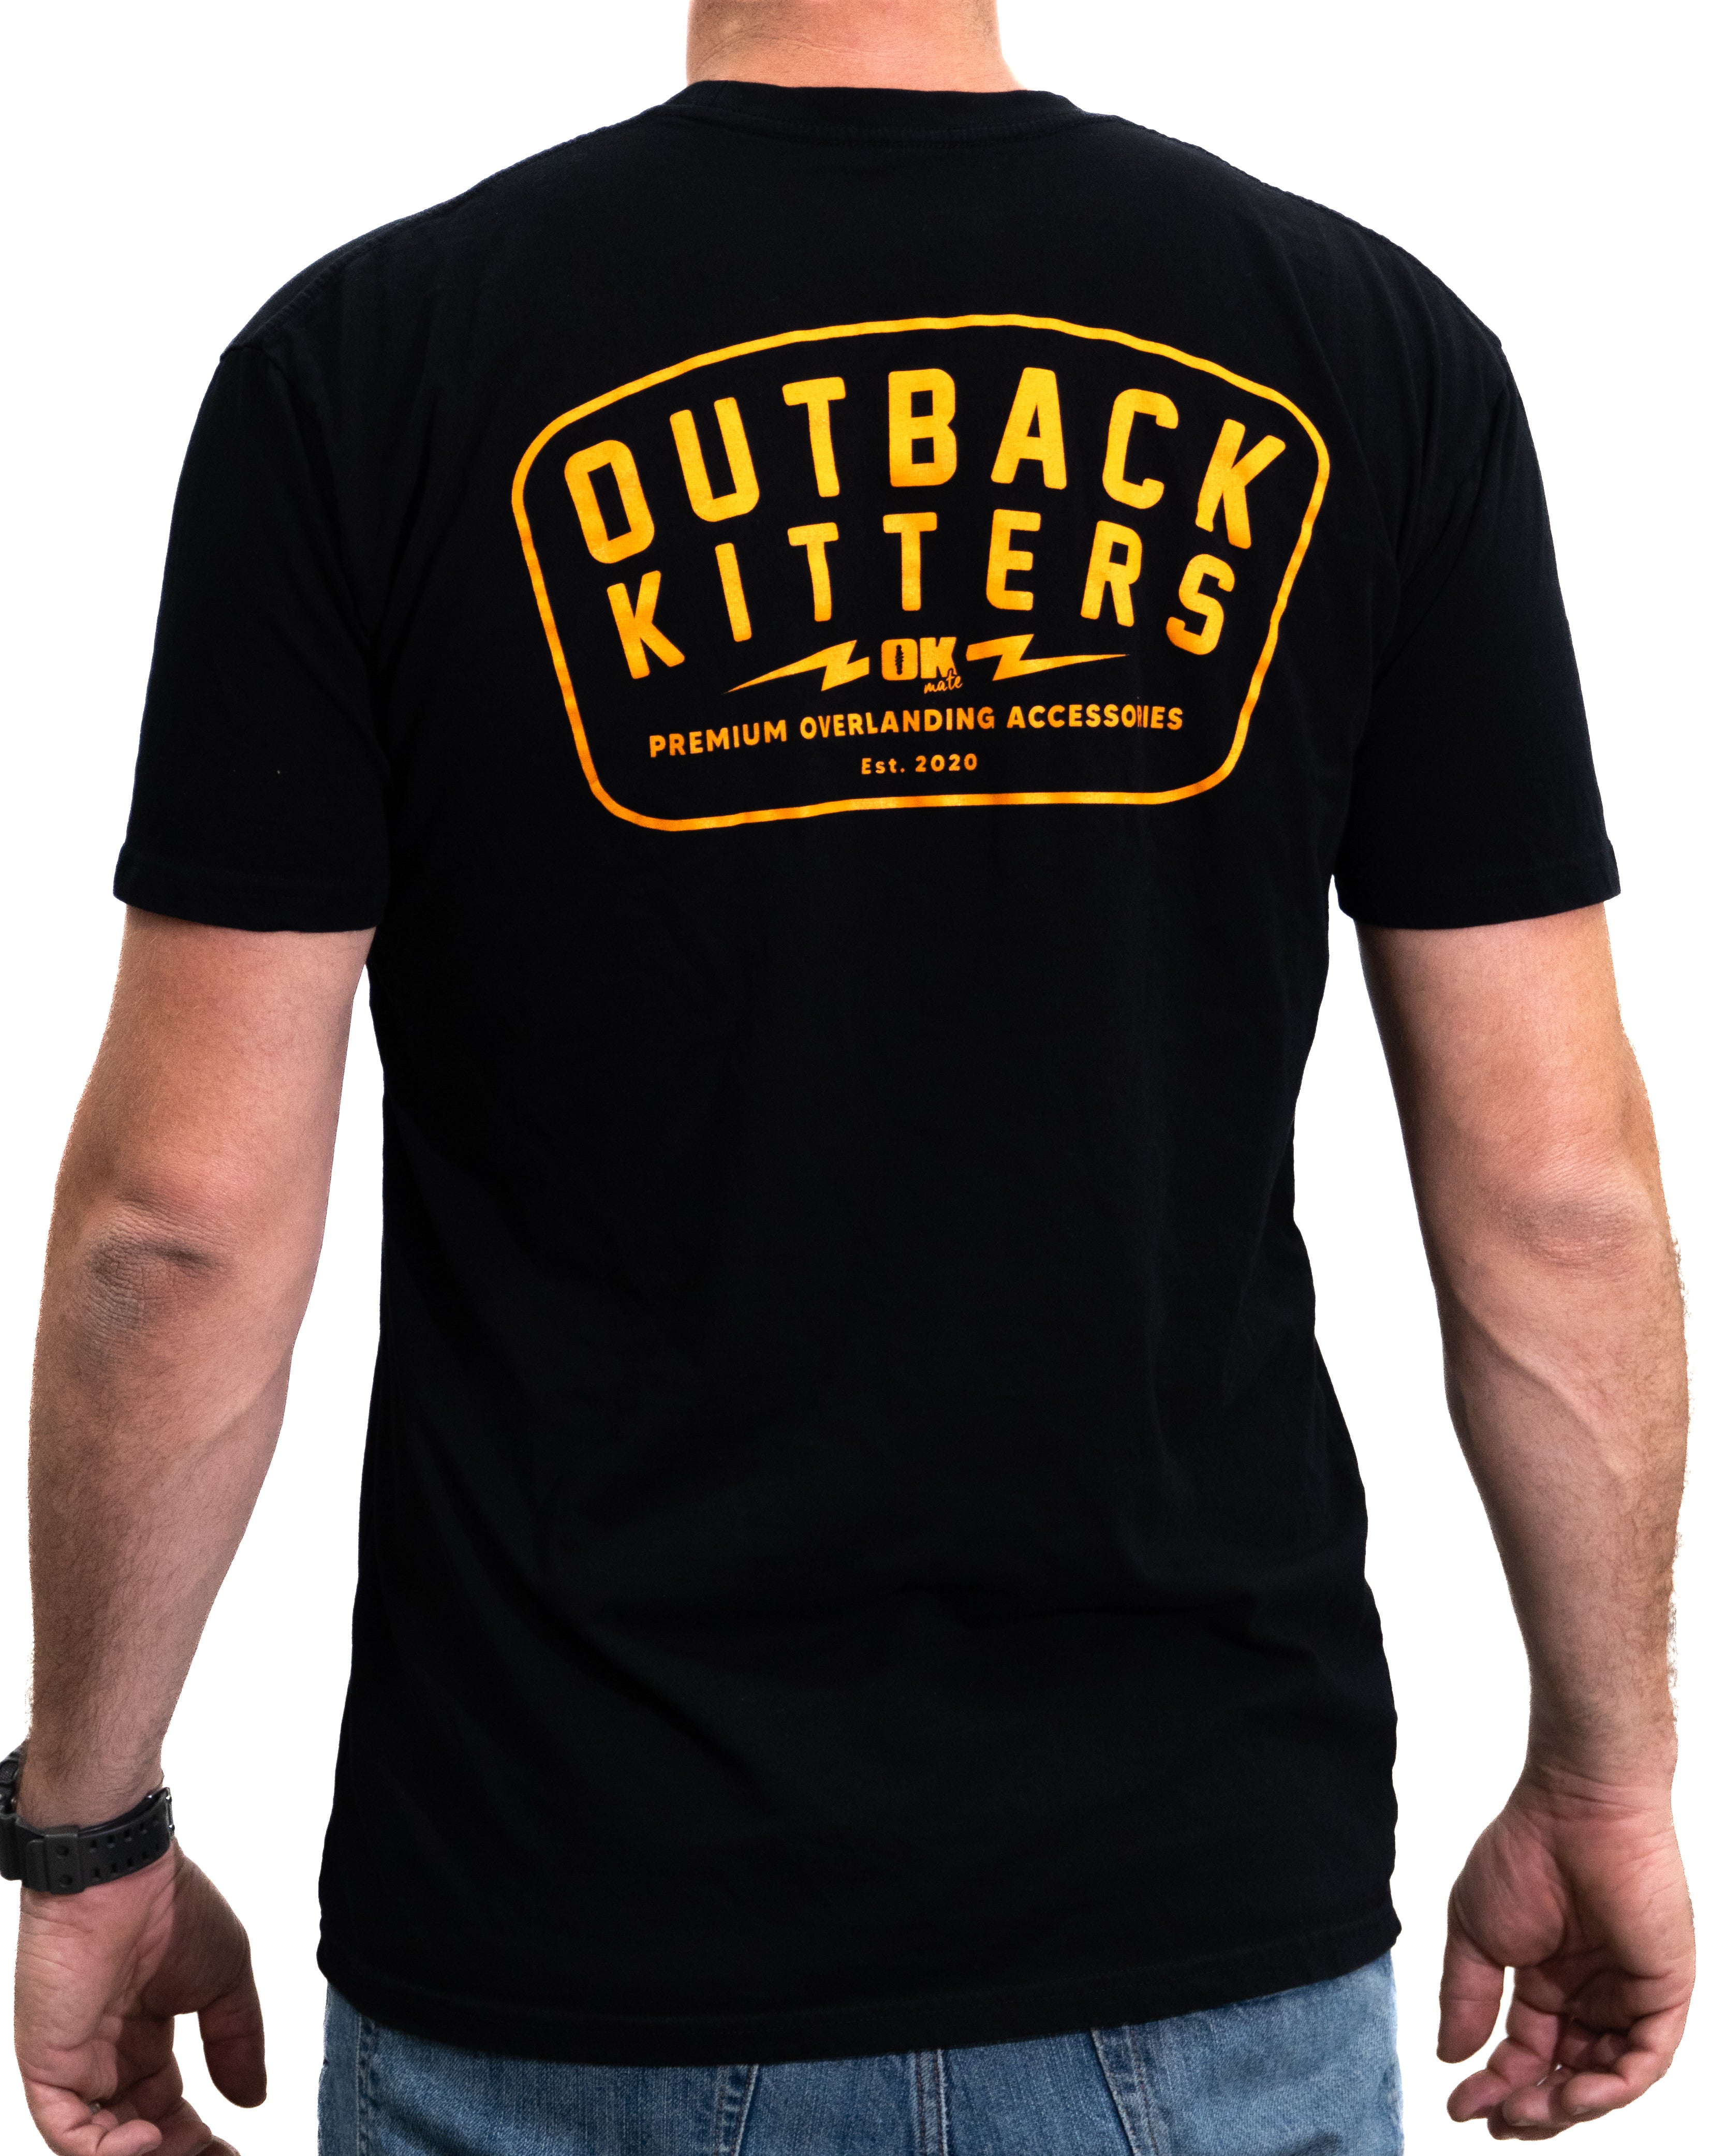 Outback Kitters "Hero" Black Tee - Outback Kitters